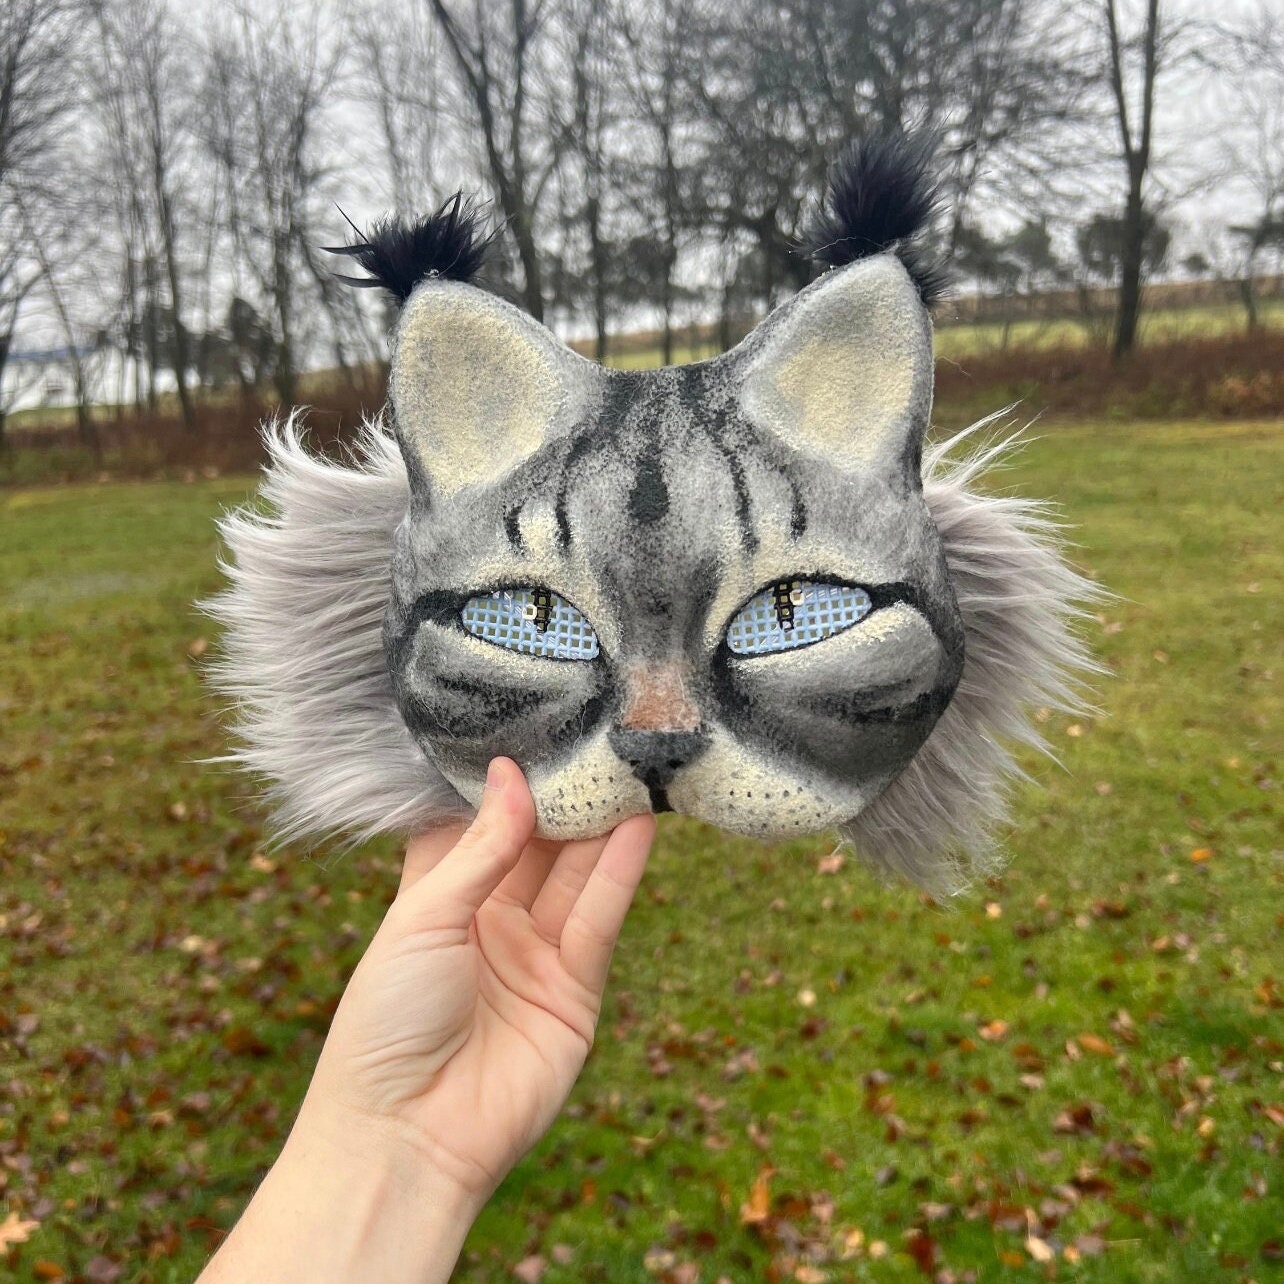 where to get therian cat mask｜TikTok Search